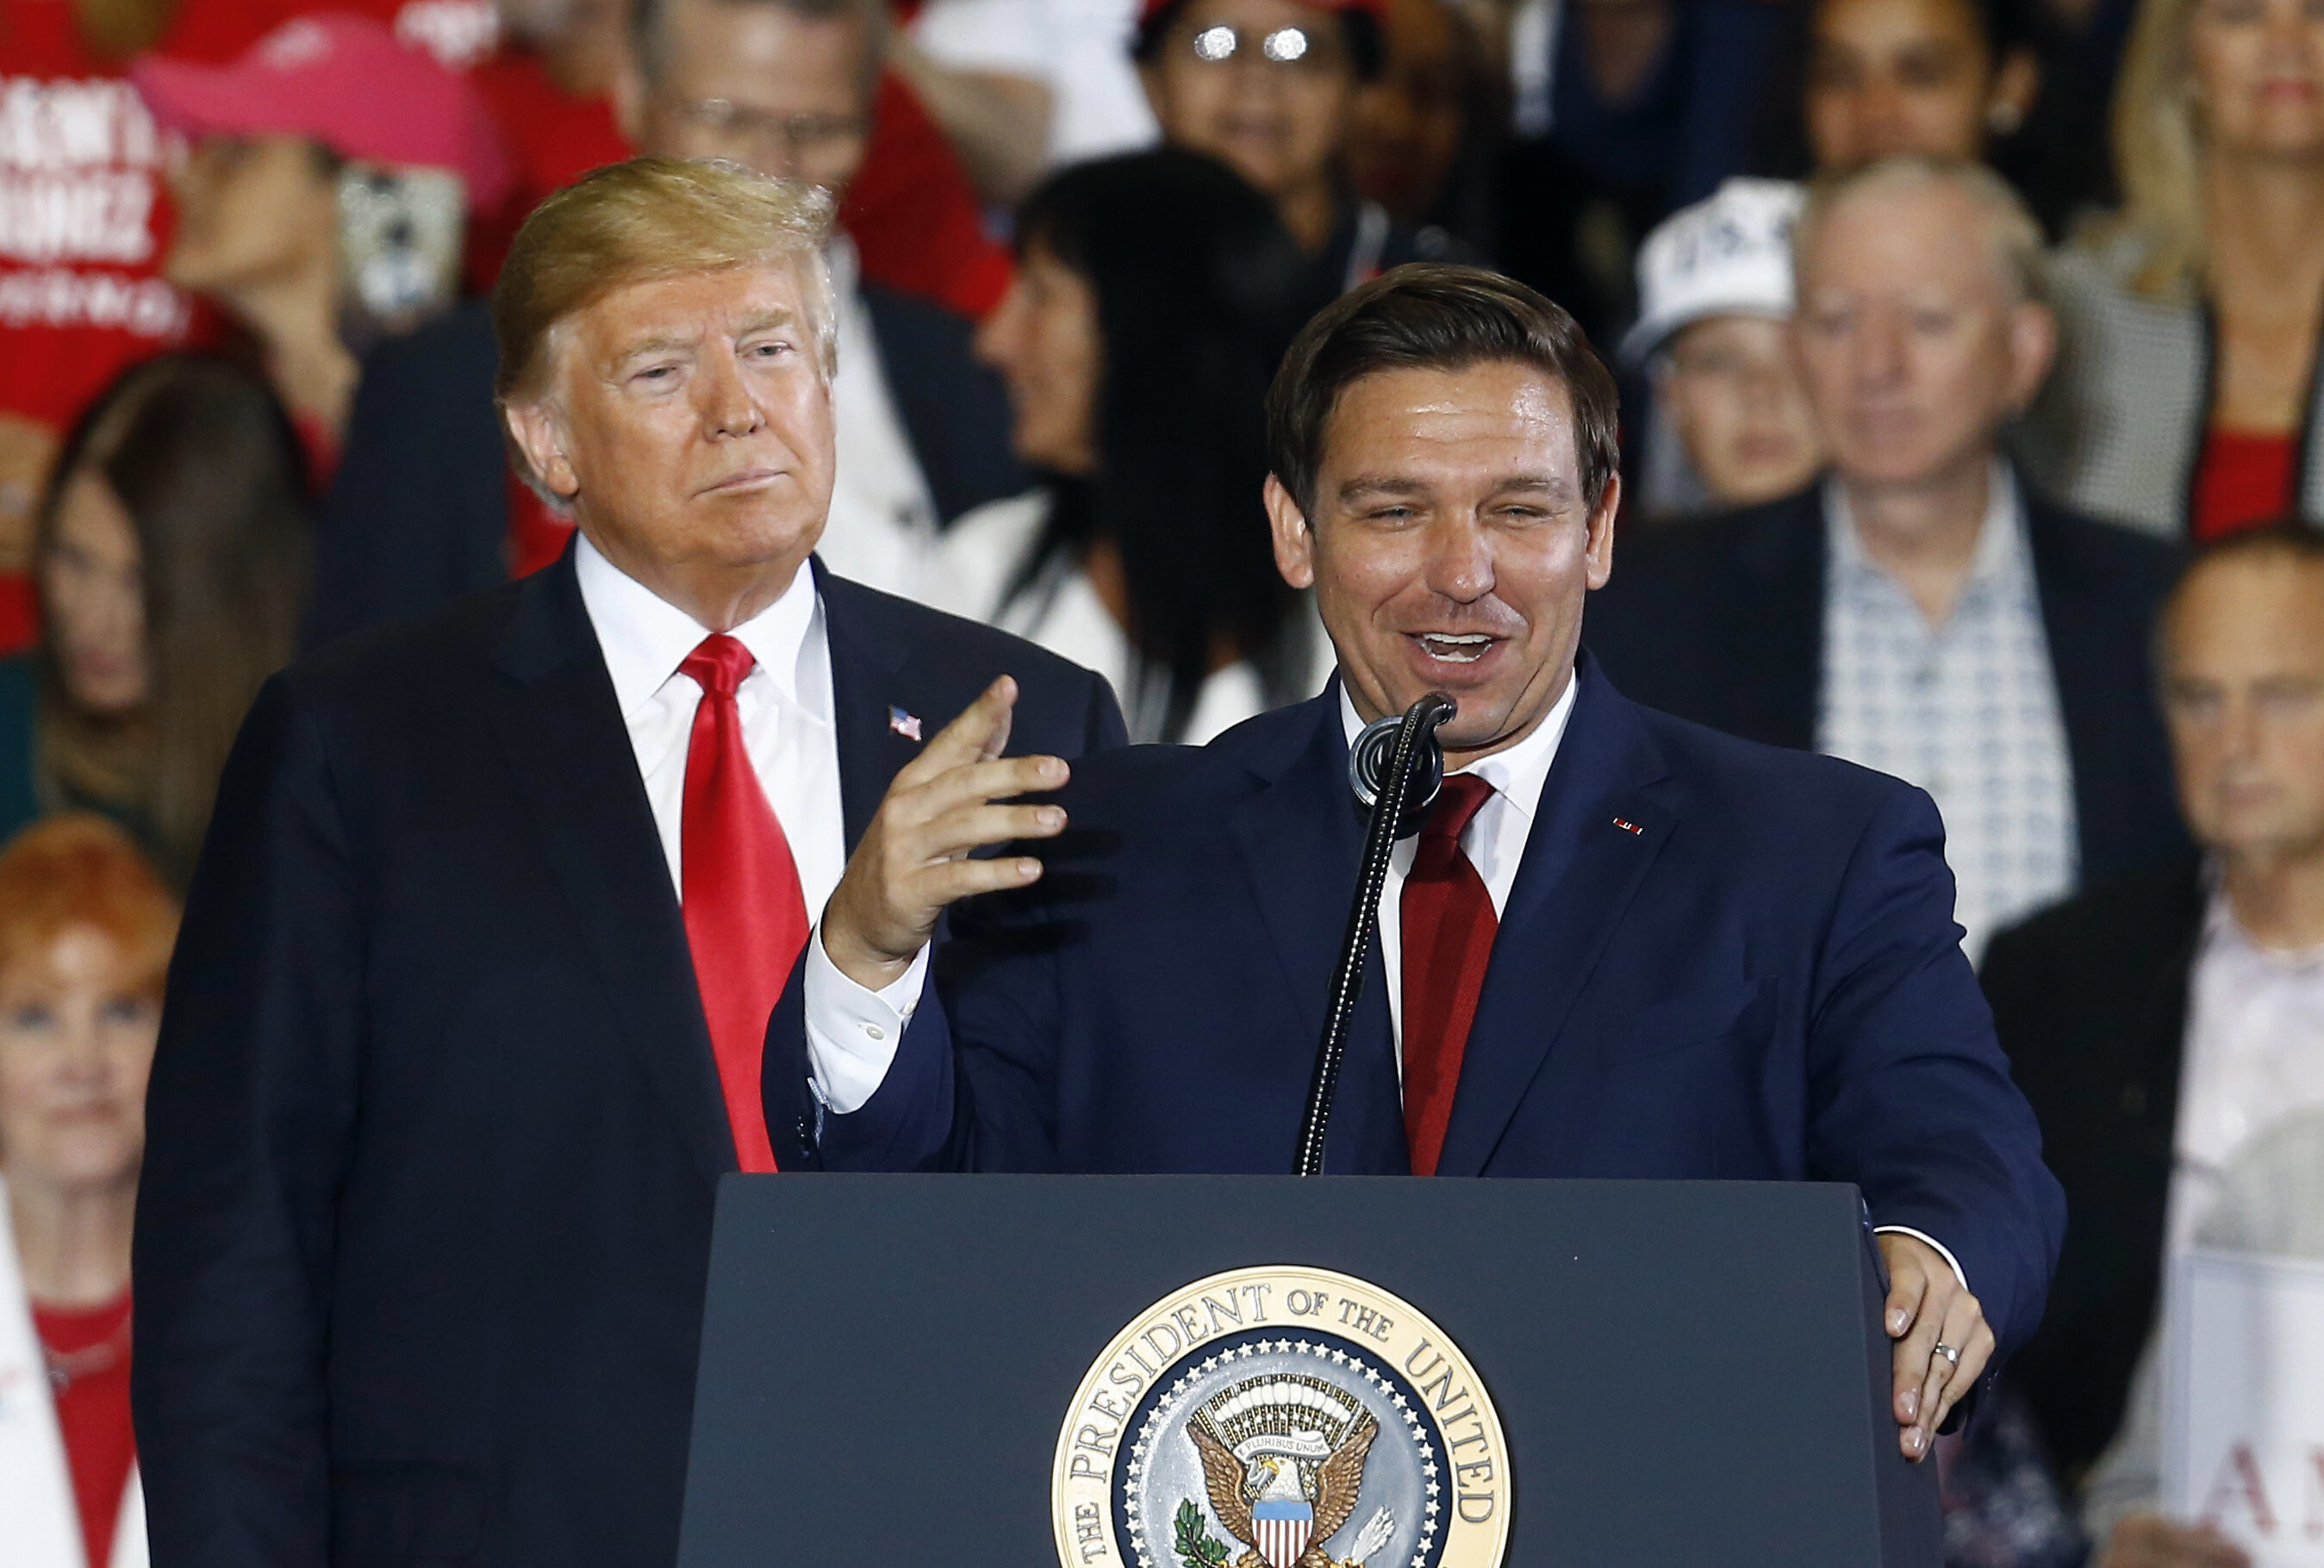 Donald Trump is trying to make up fundraising ground against President Joe Biden while Florida Gov. Ron DeSantis hopes to preserve a potential future White House run for which Trump's supporters could be key.